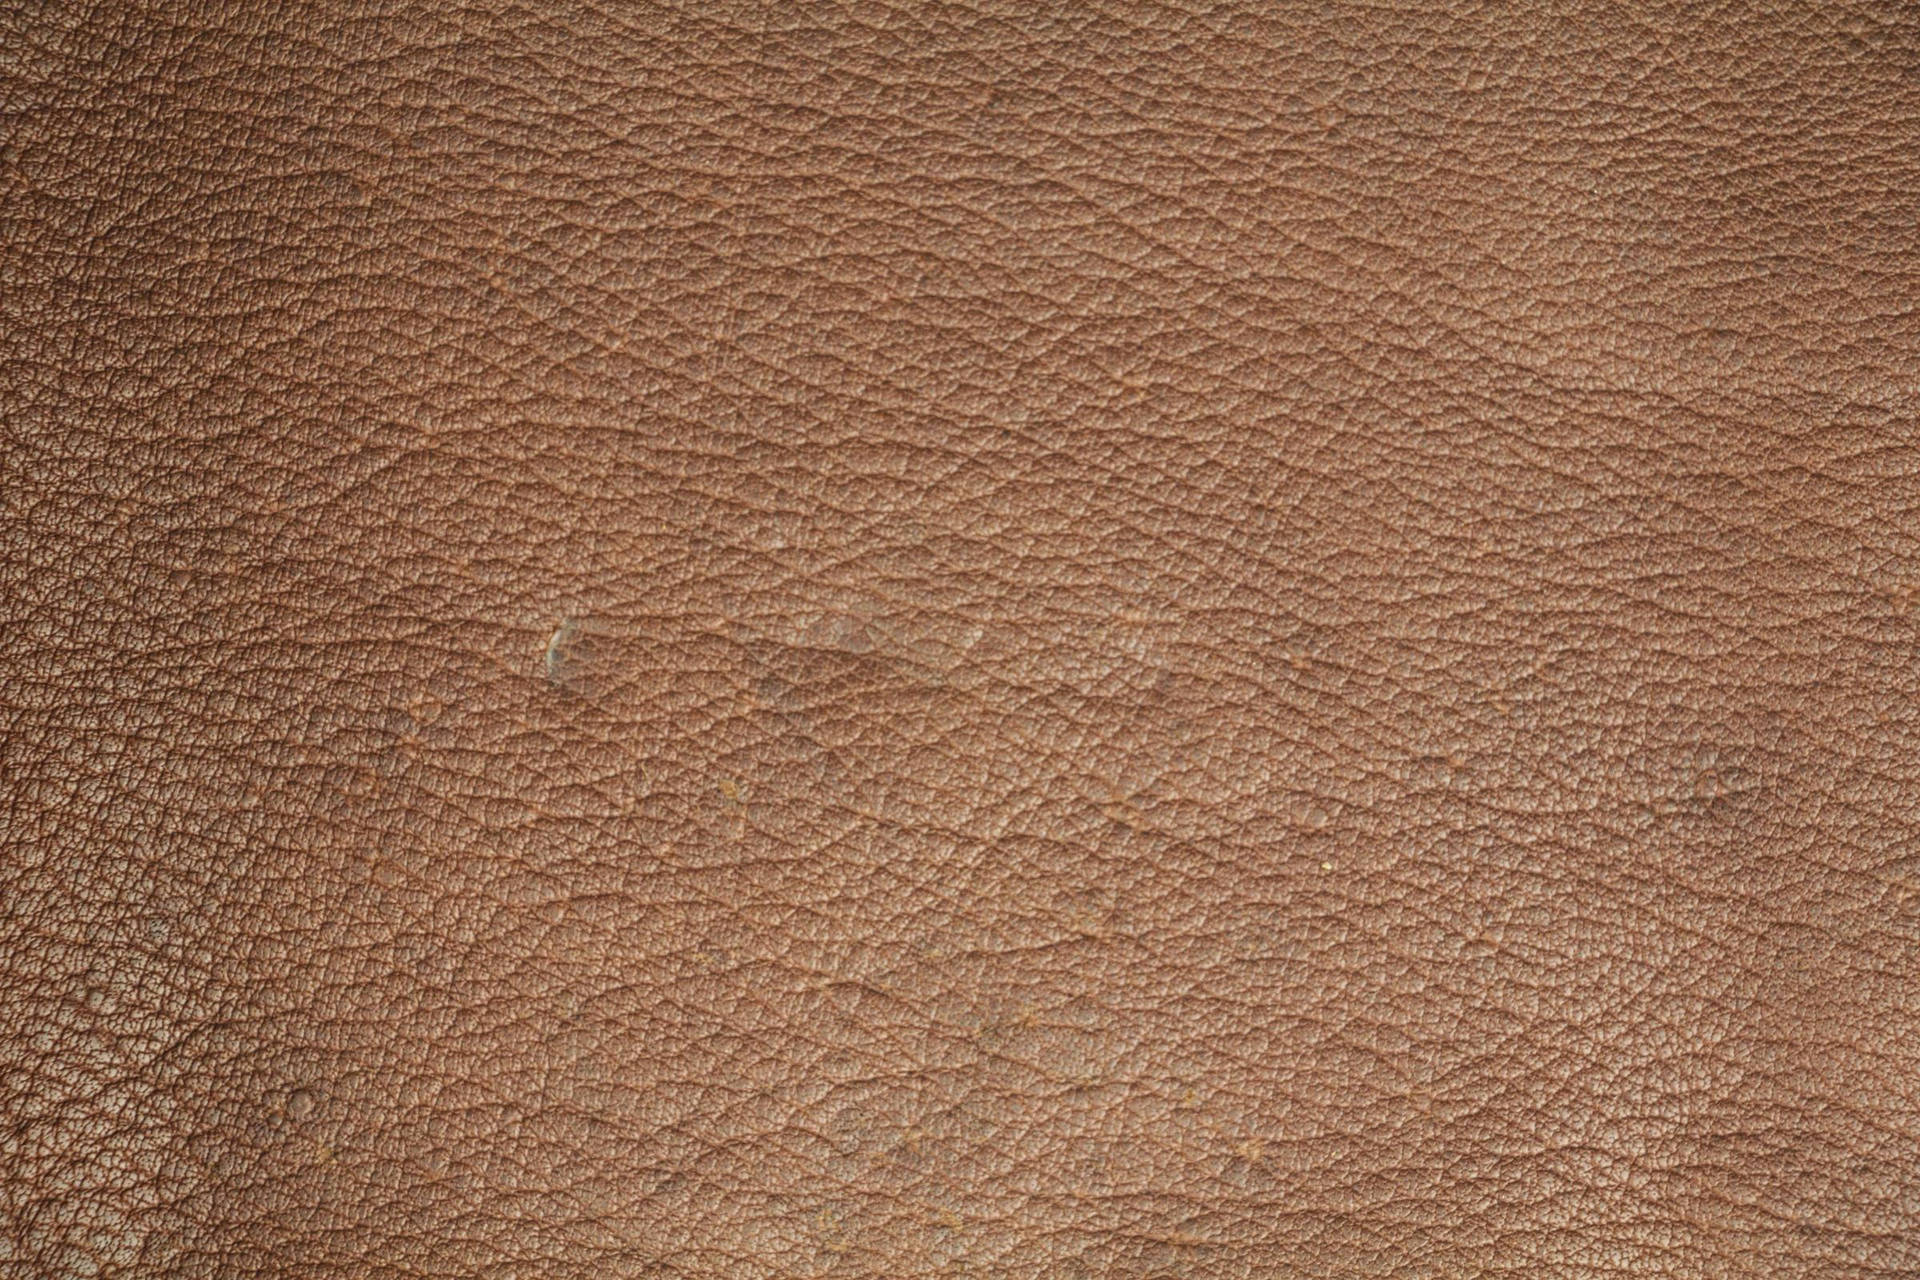 Minimalist Light Brown Leather Texture Book Cover Wallpaper